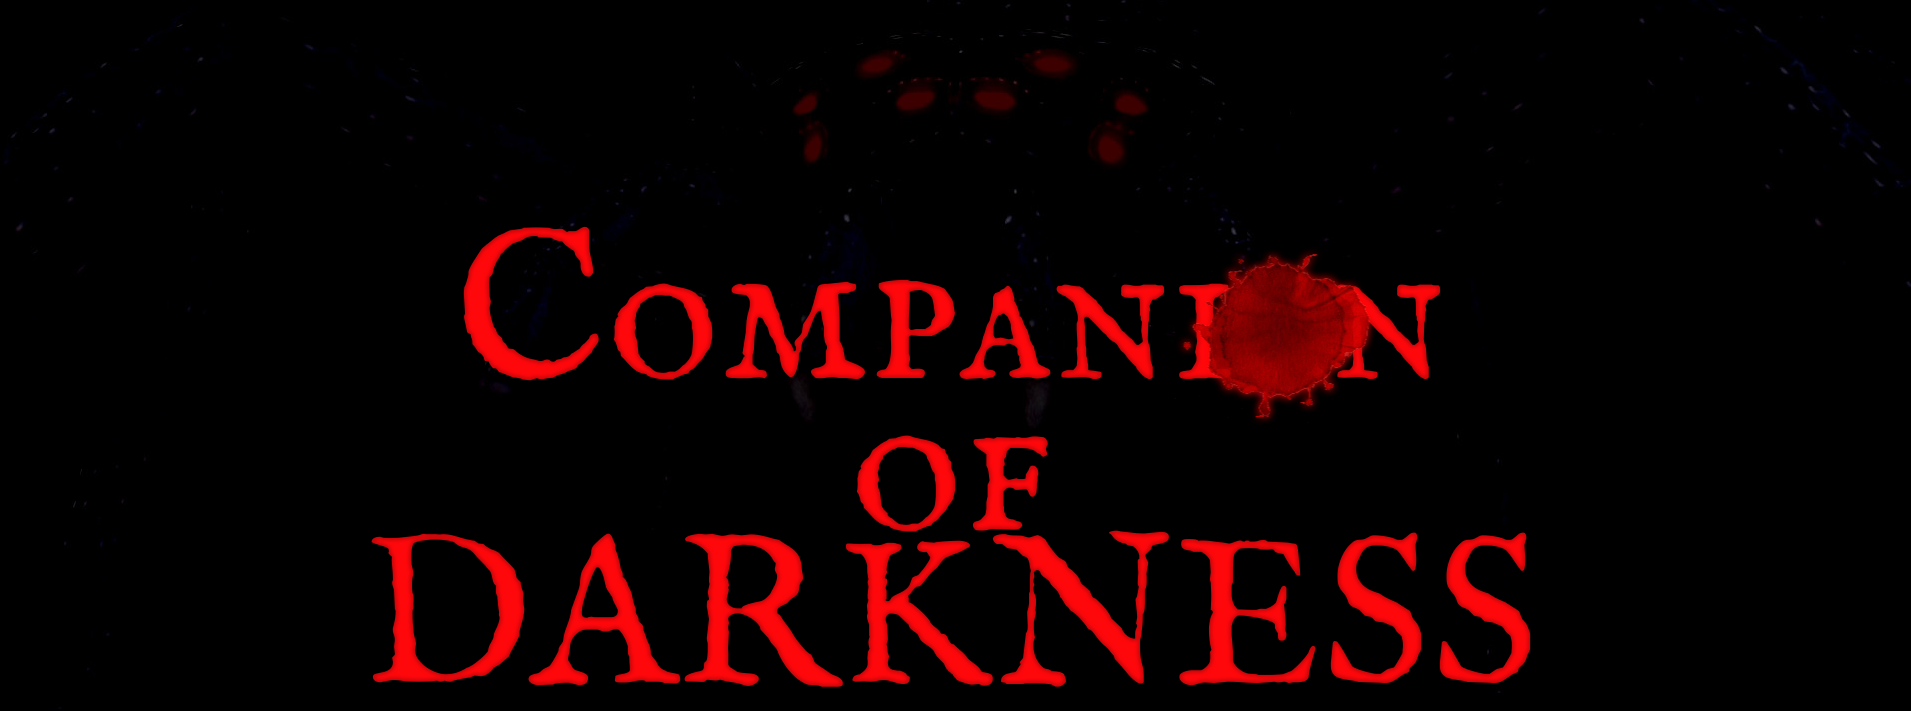 Companion of DARKNESS1.png